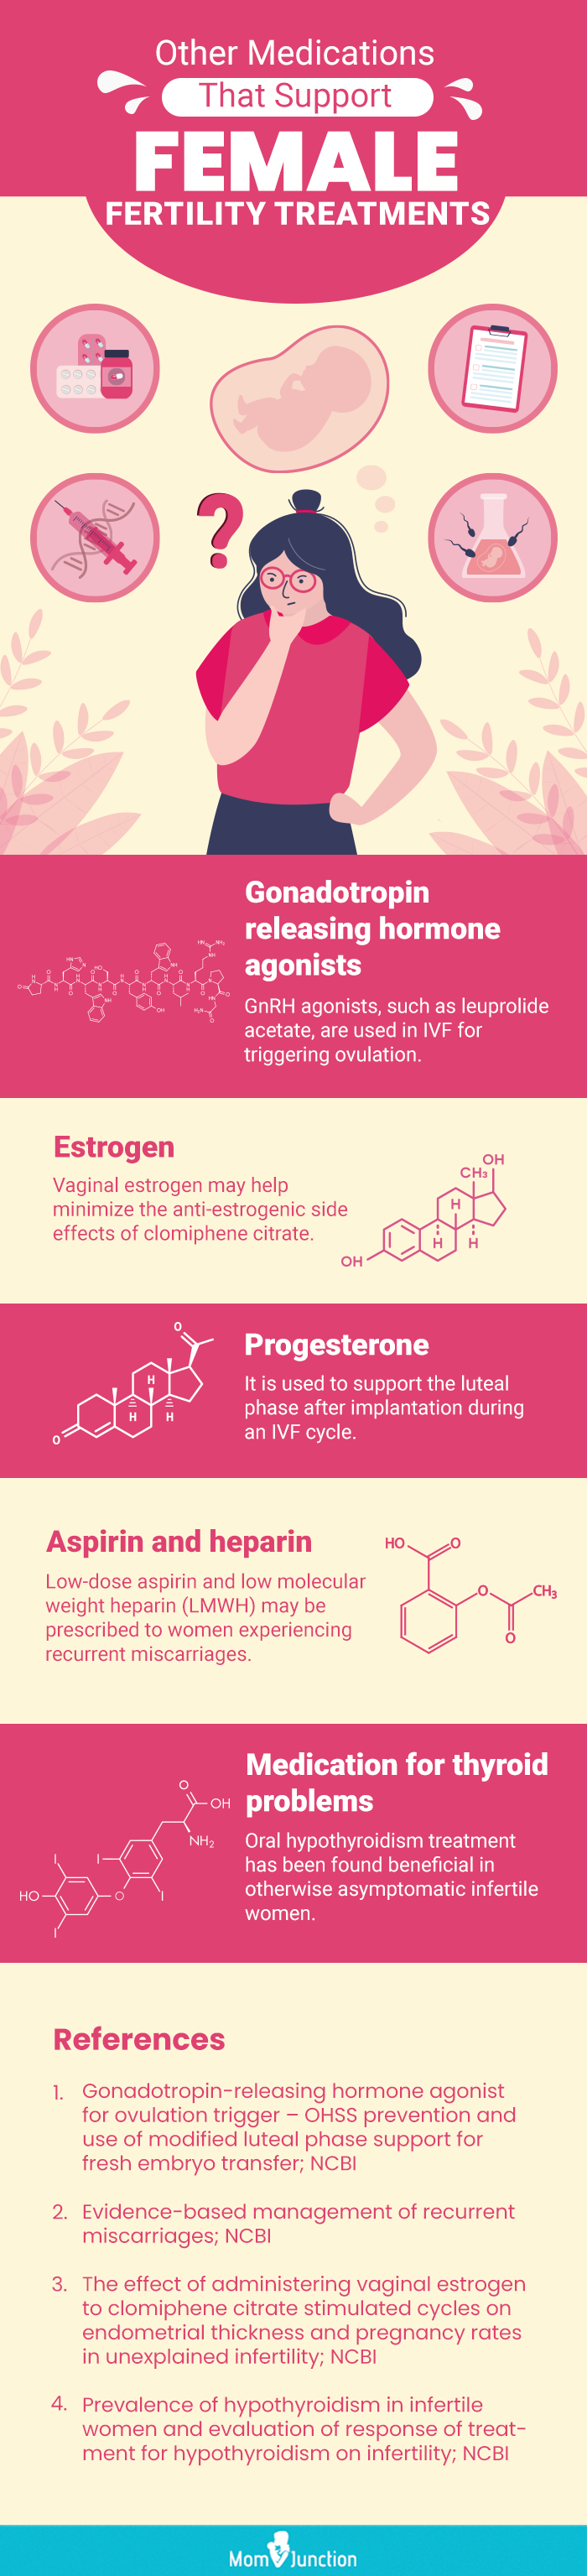 other medications that support female fertility treatments [infographic]